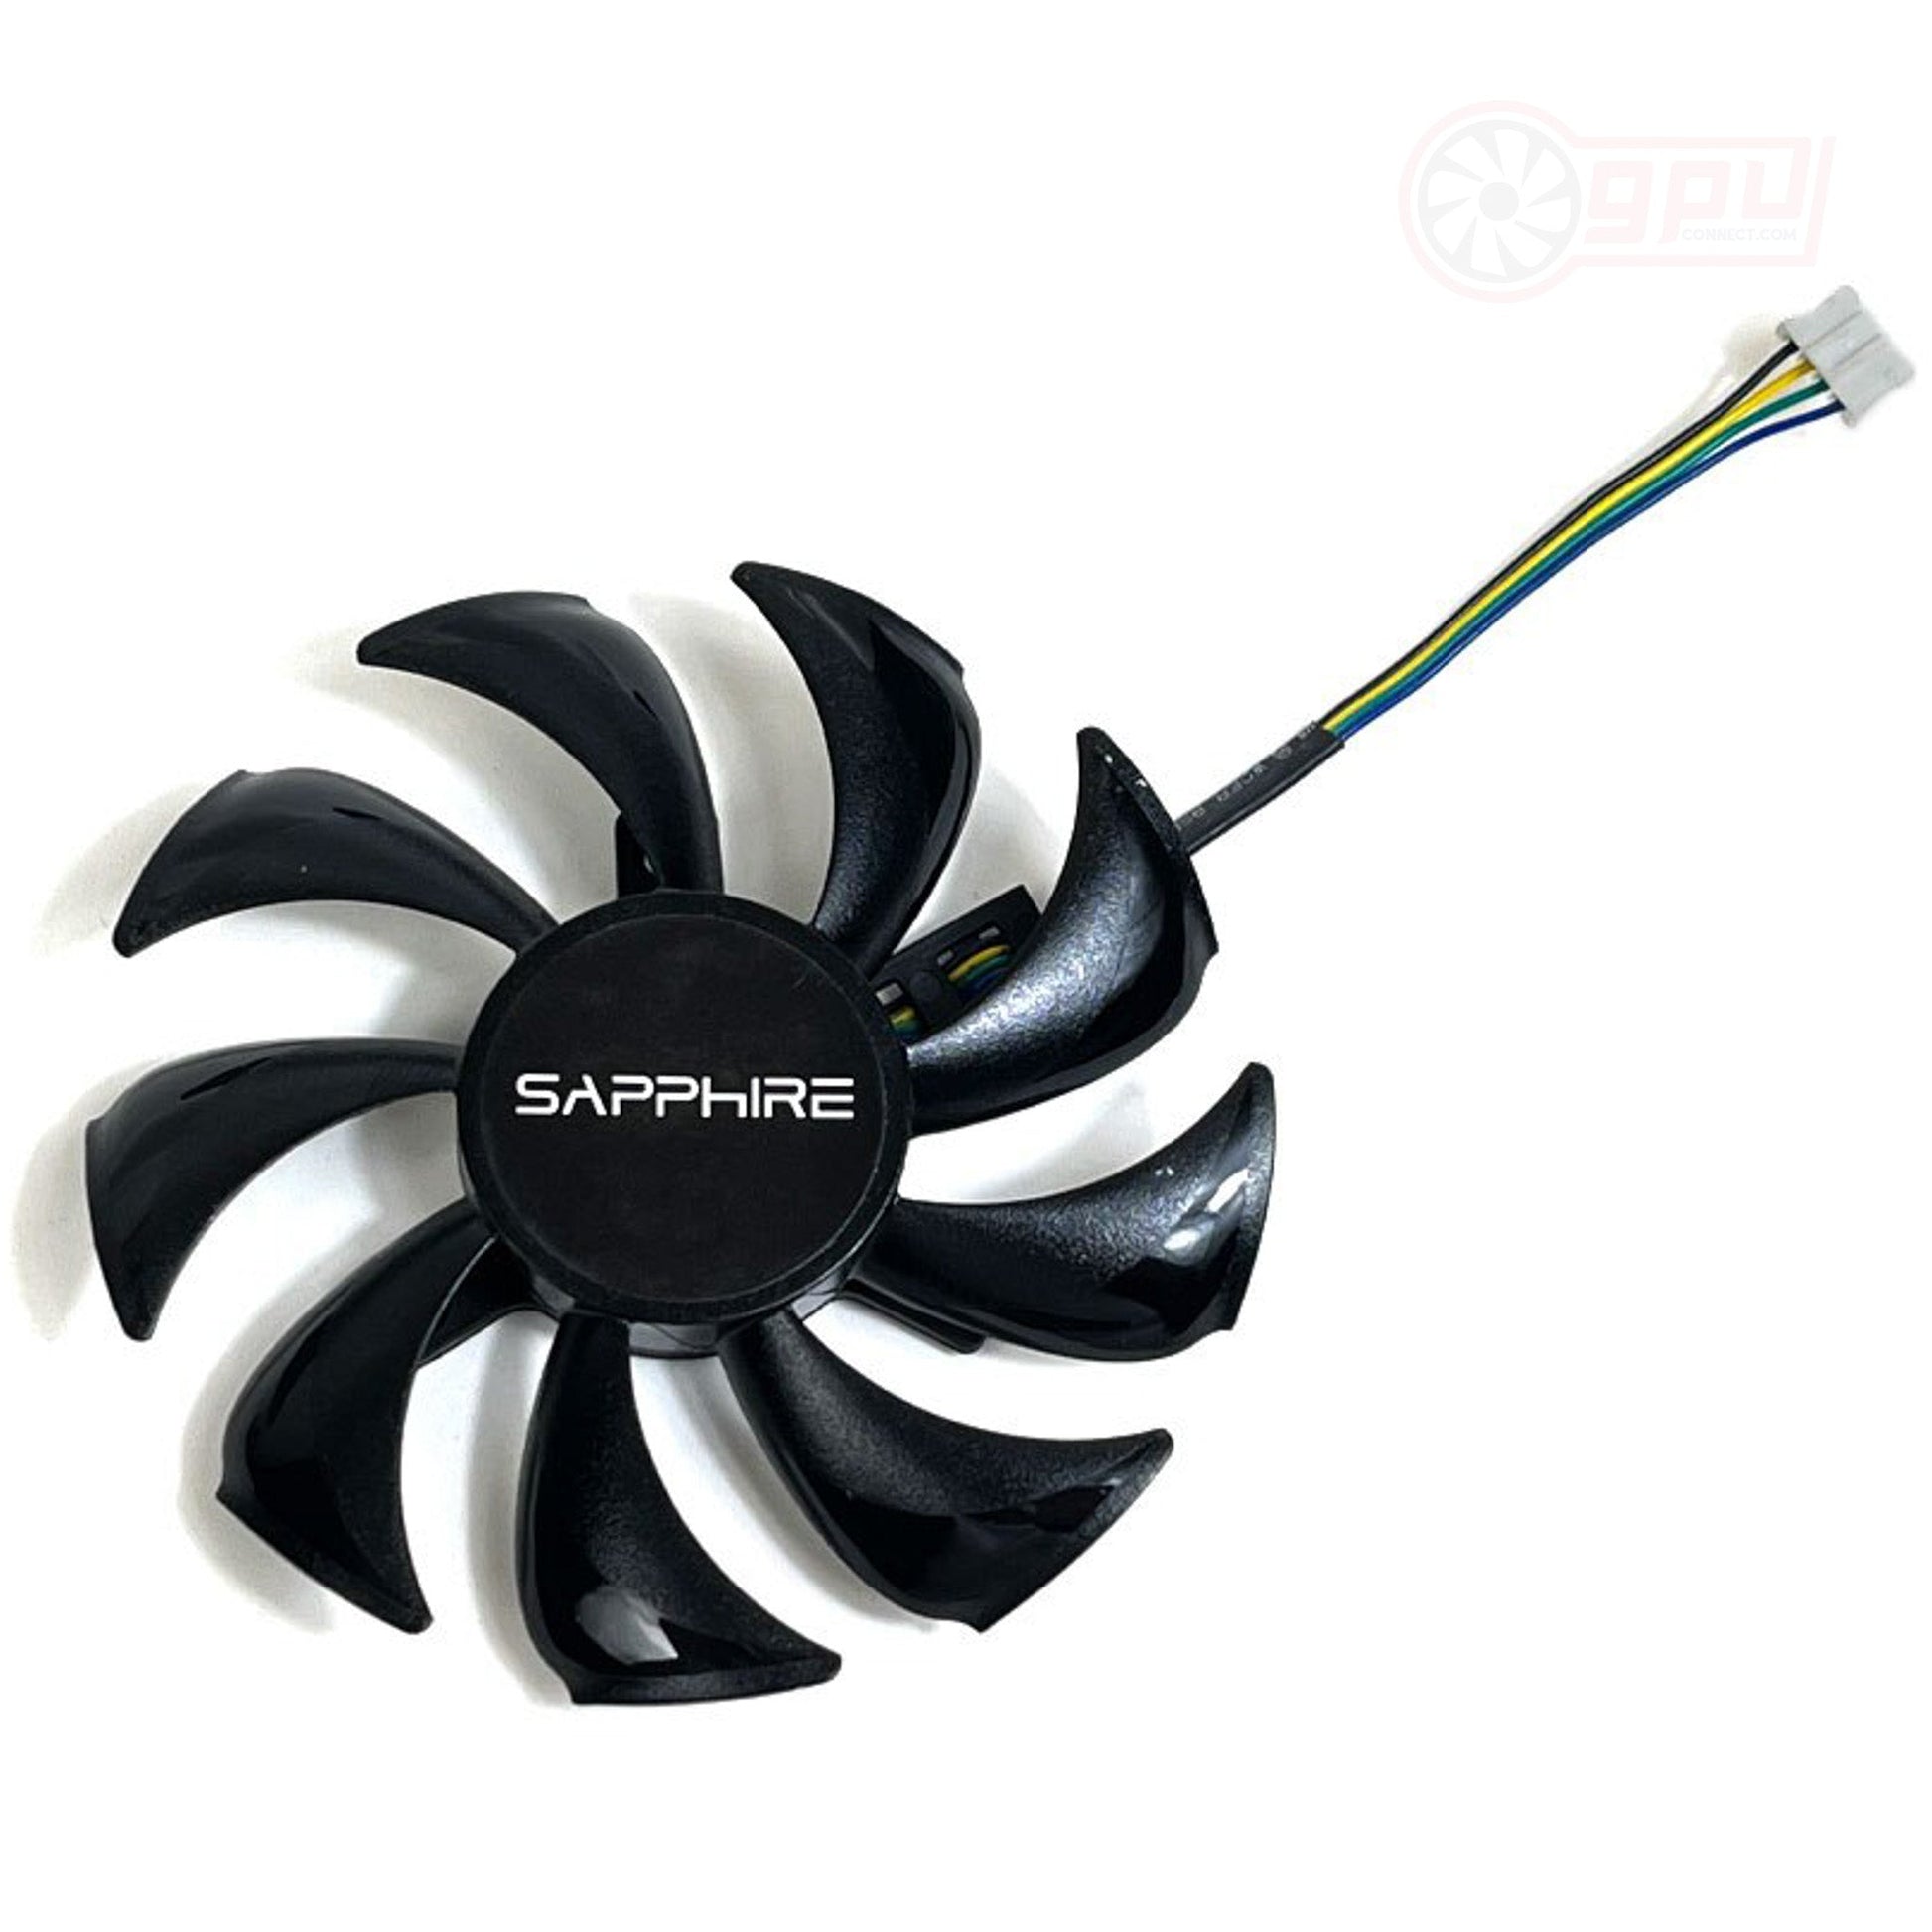 Sapphire RX 460 550 Graphics Replacement Graphics Card Cooling Fan - GPUCONNECT.COM